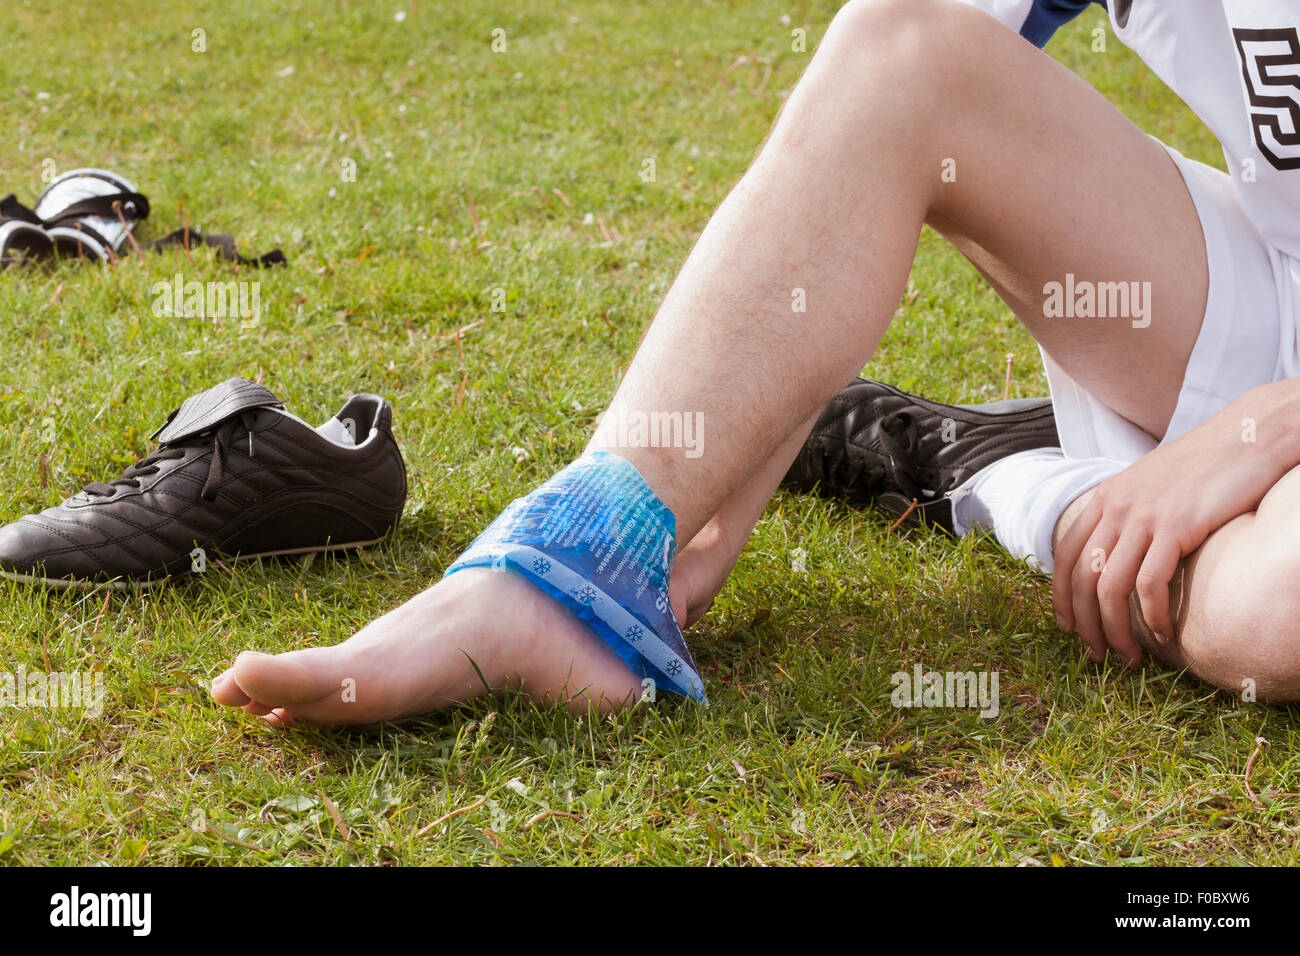 Low section of soccer player applying ice pack on ankle in field Stock Photo